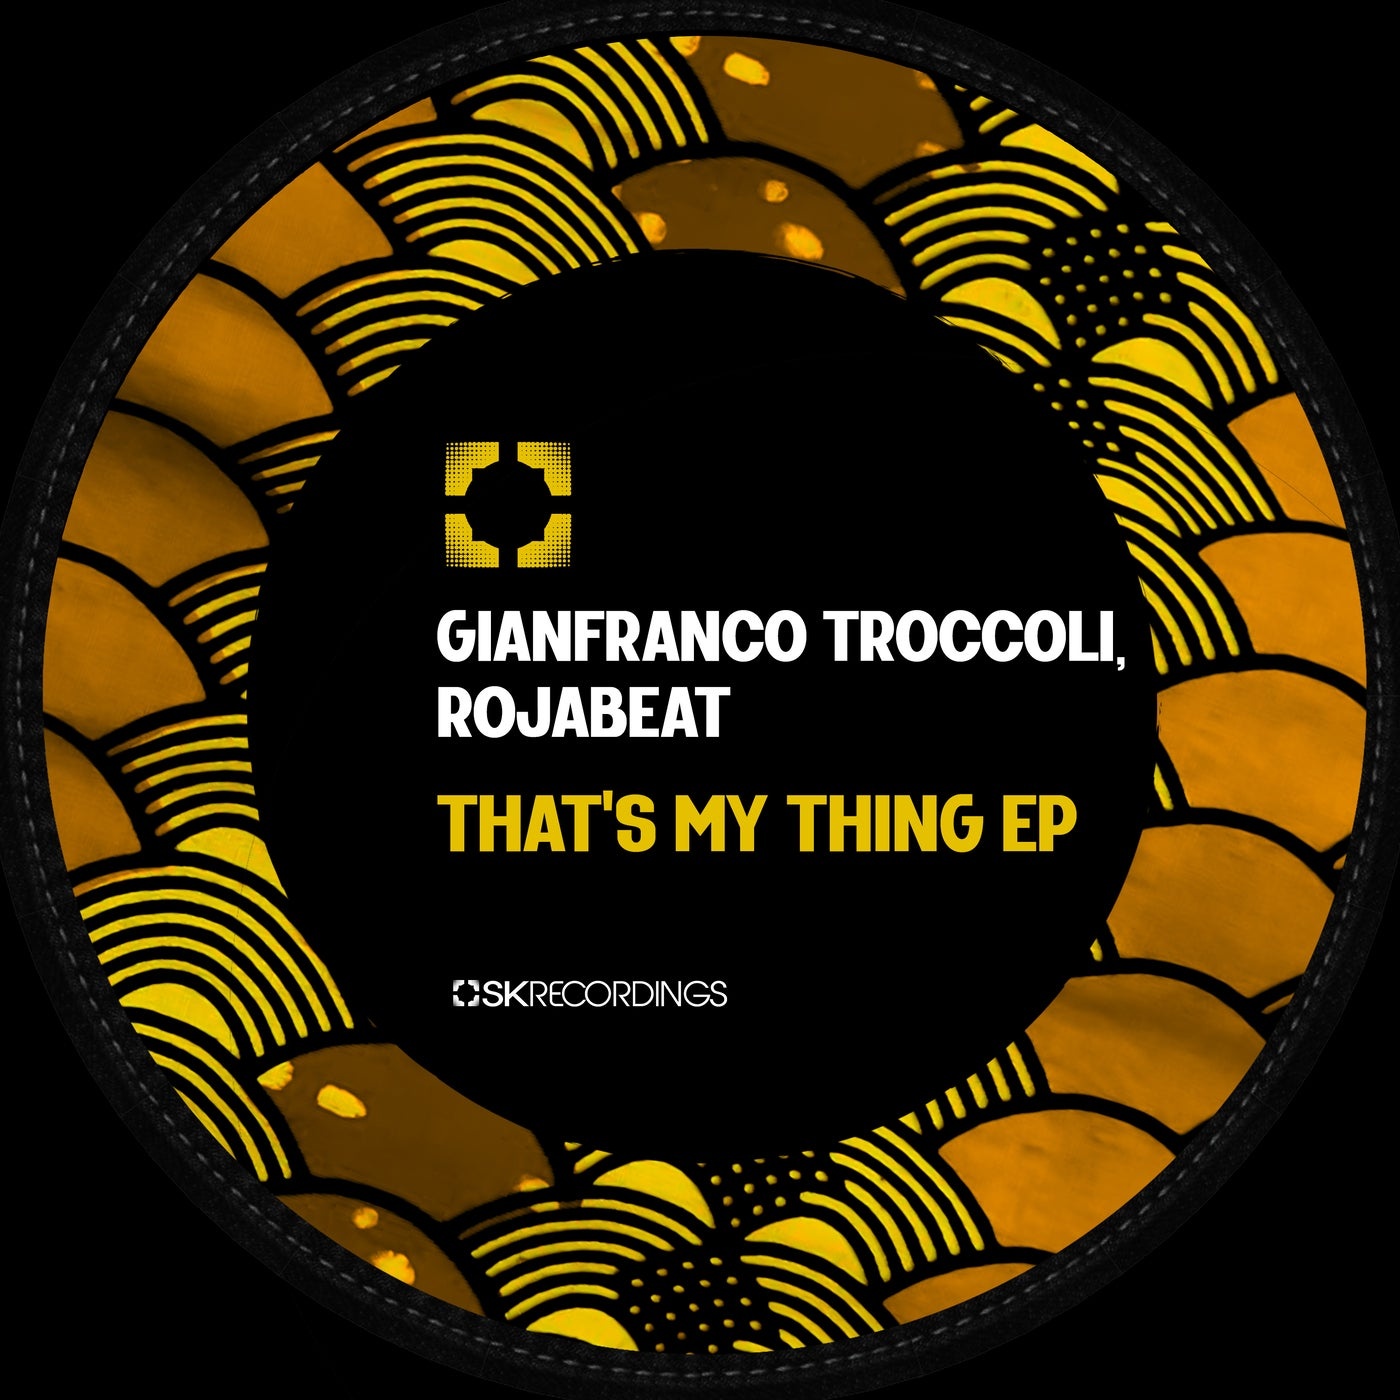 image cover: Gianfranco Troccoli, Rojabeat - That's My Thing / SK224